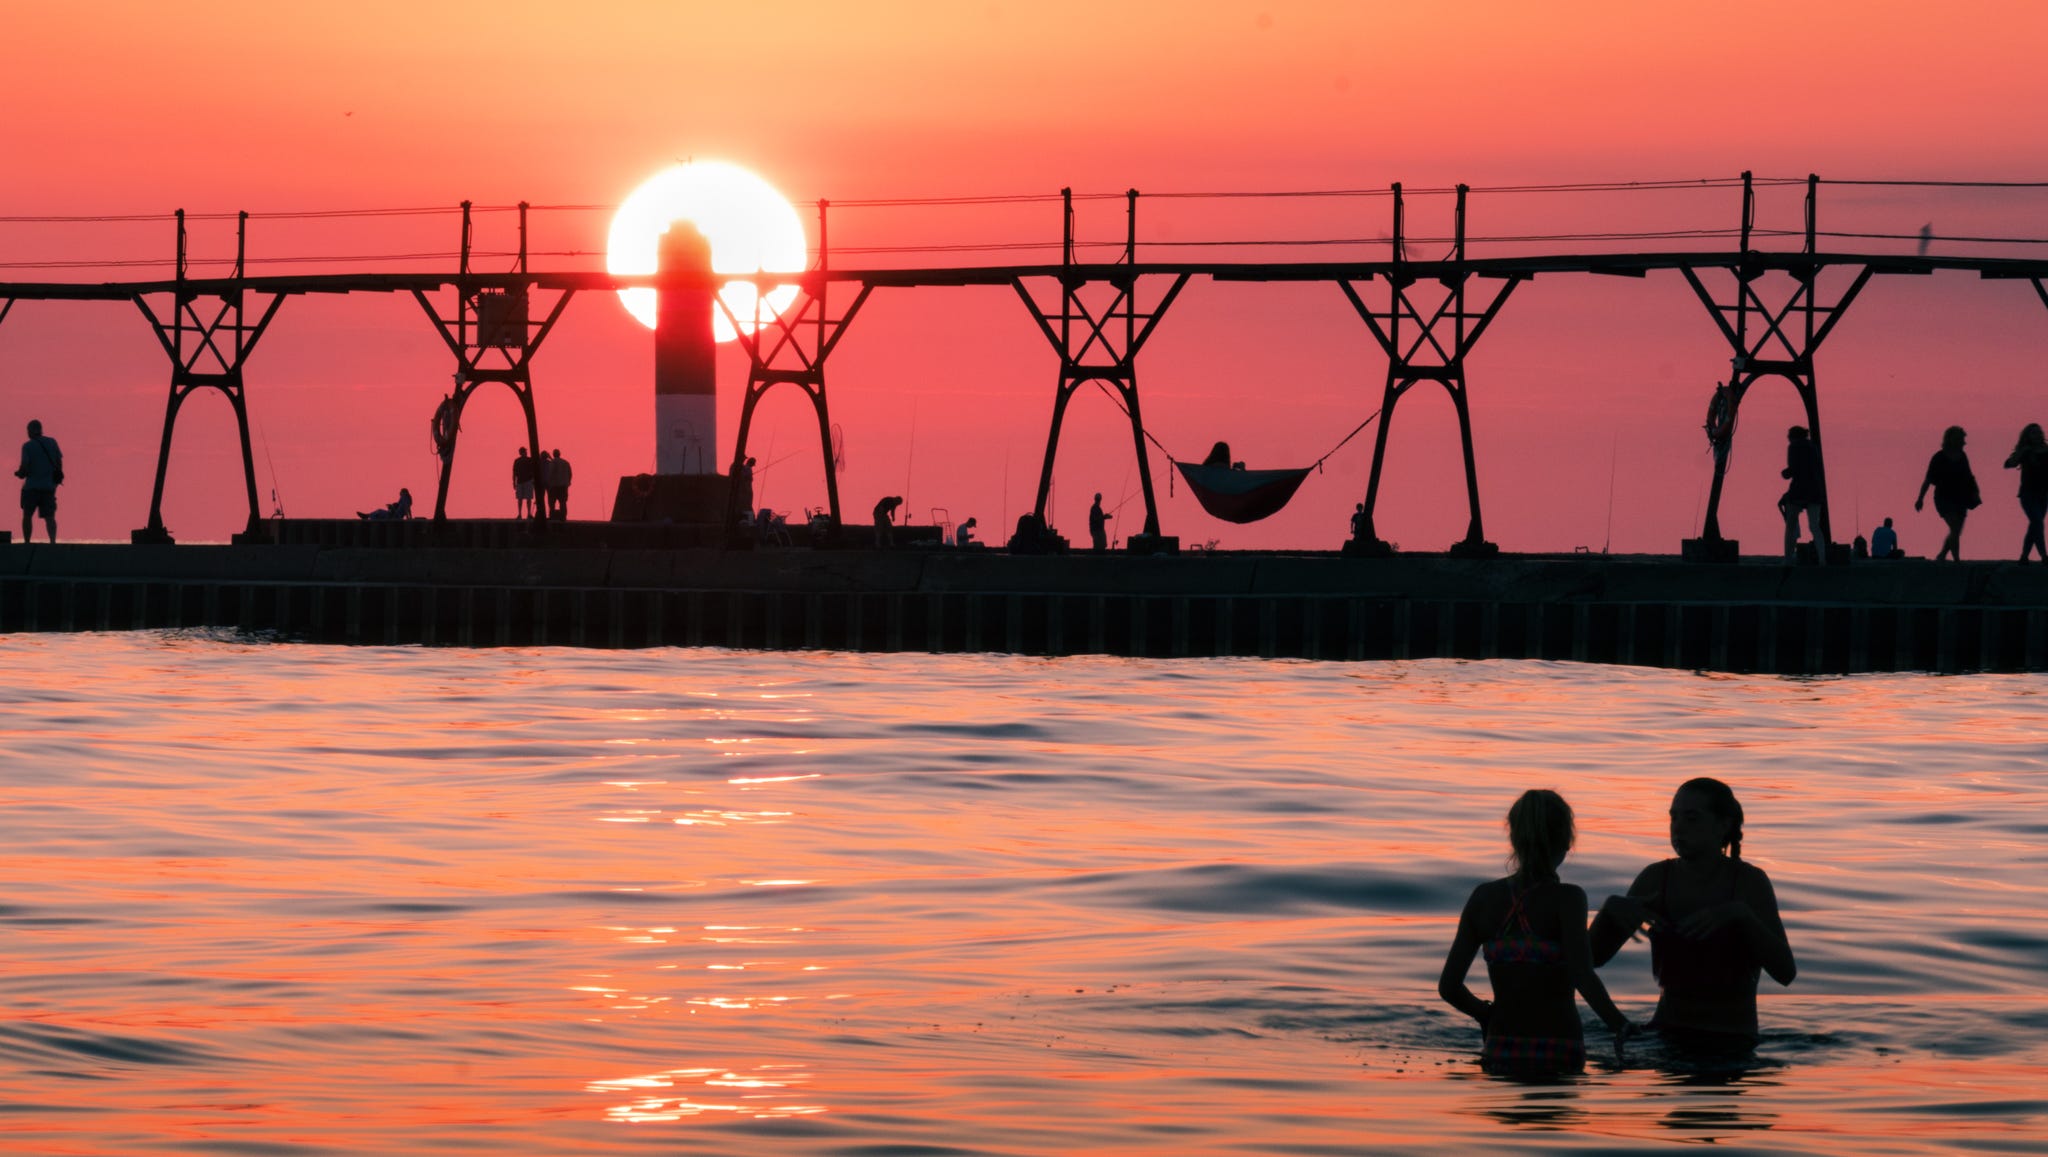 The Grand Haven lighthouse and pier attract all kinds of activities in "Enjoying Day's End," by Paula Buermele of Adrian. "I try to capture the sense of family and friends in my photos ... and who can resist a sunset?" she said.